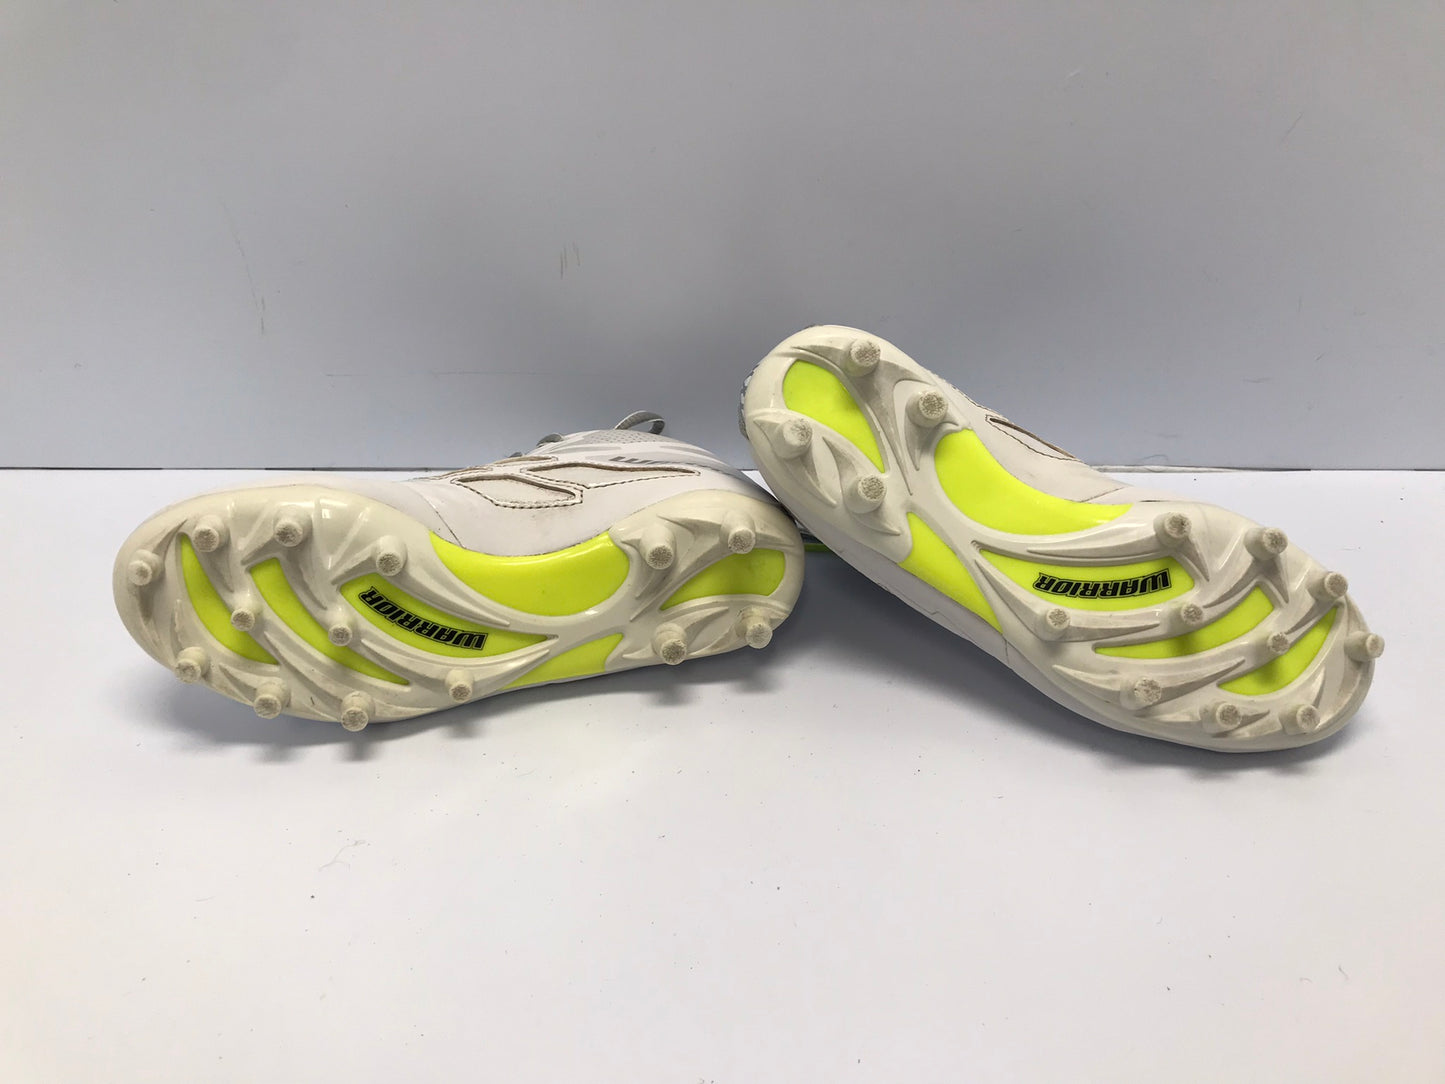 Lacrosse Shoes Cleats Child Size 2 Warrior White Grey